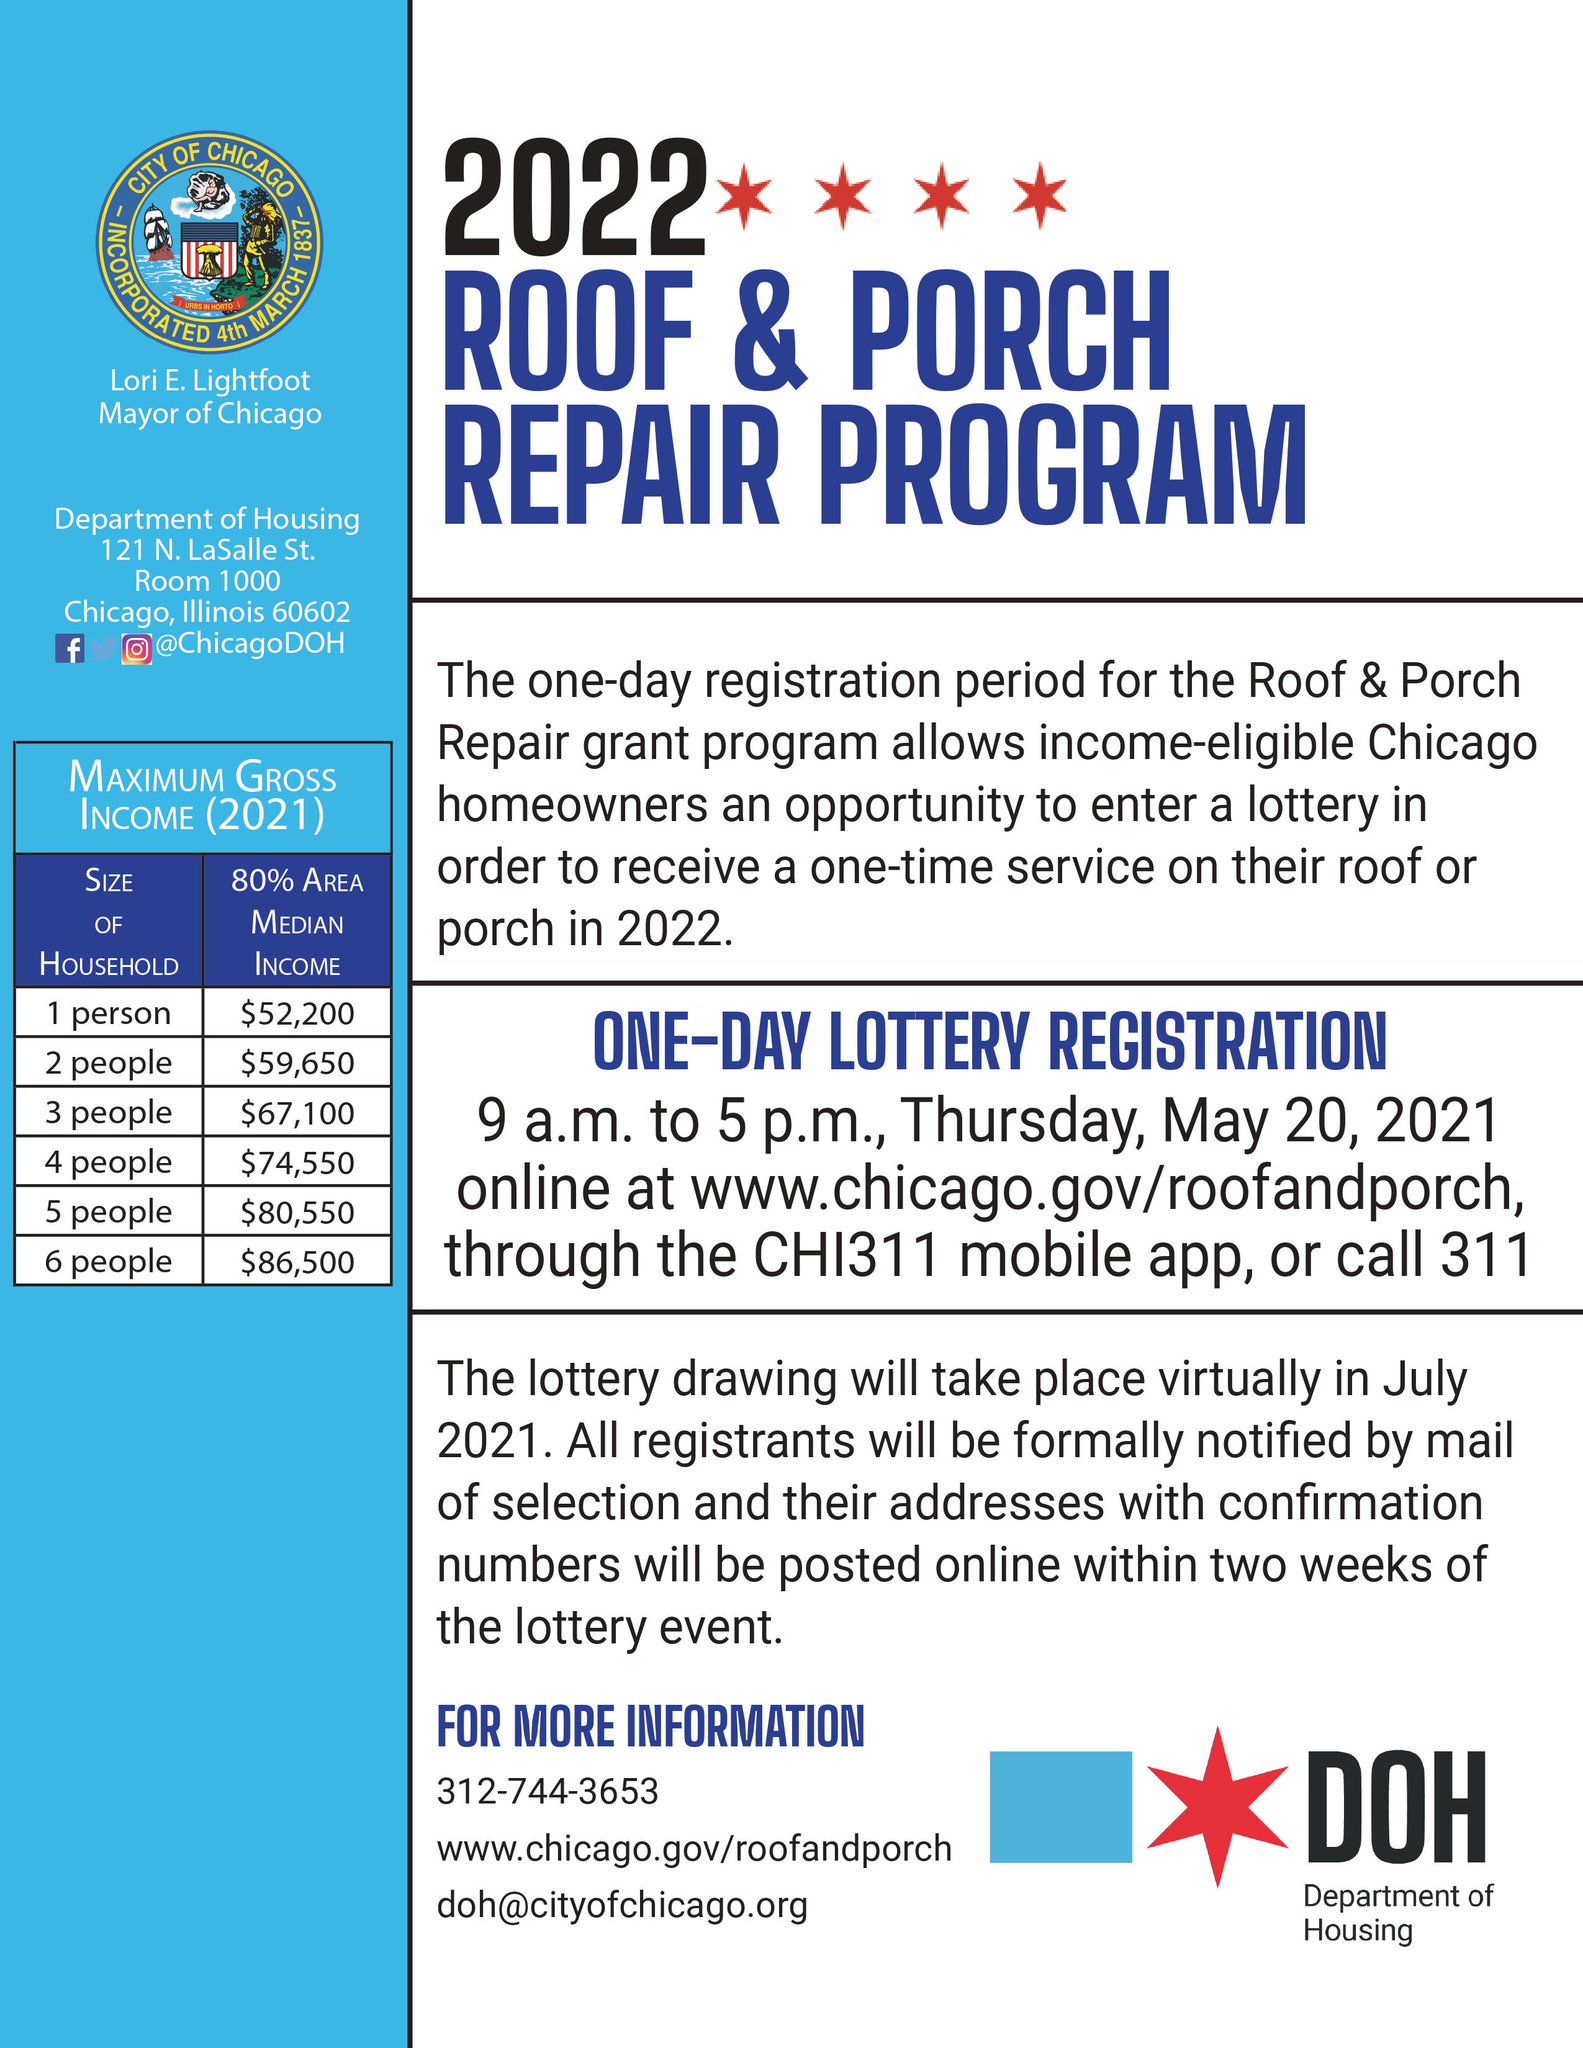 Roof and Porch Repair Program ONE-DAY REGISTRATION DATE: 5/20/21